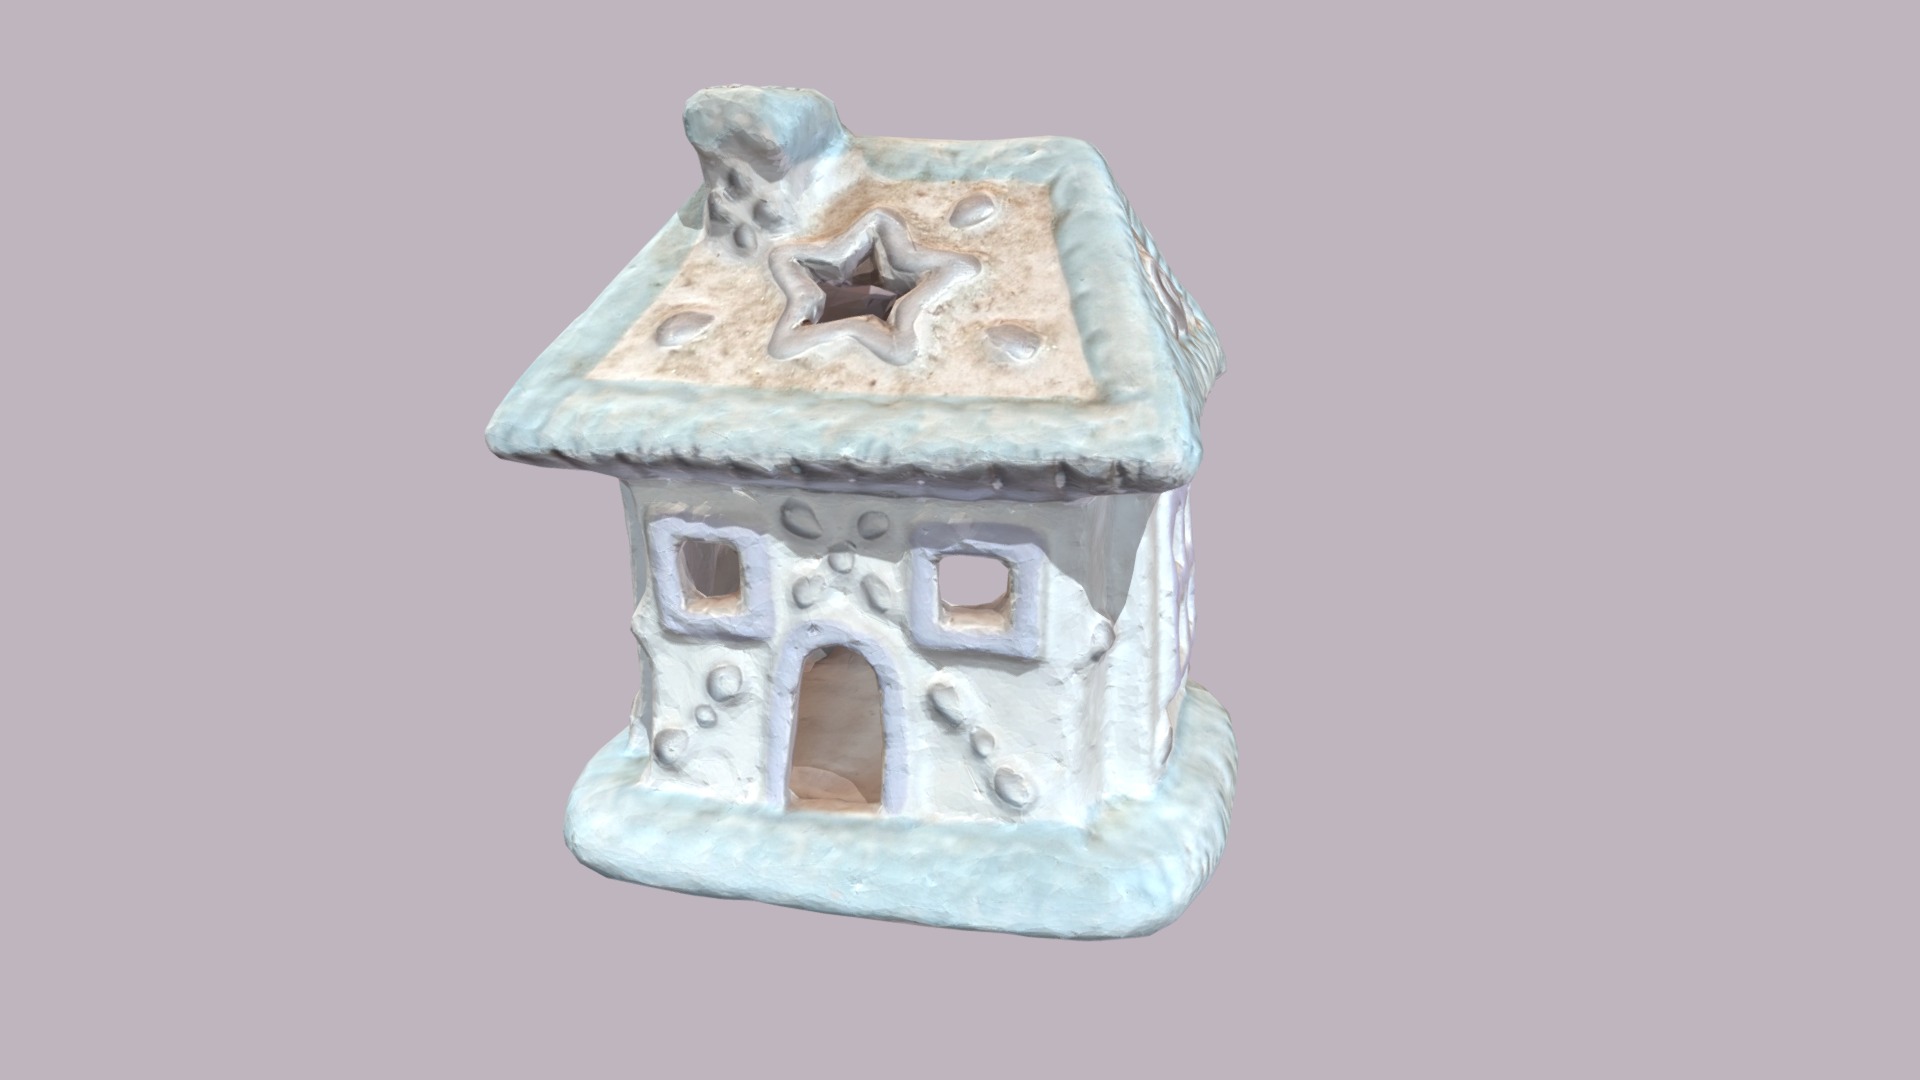 3D model Little House - This is a 3D model of the Little House. The 3D model is about a small blue and white object.